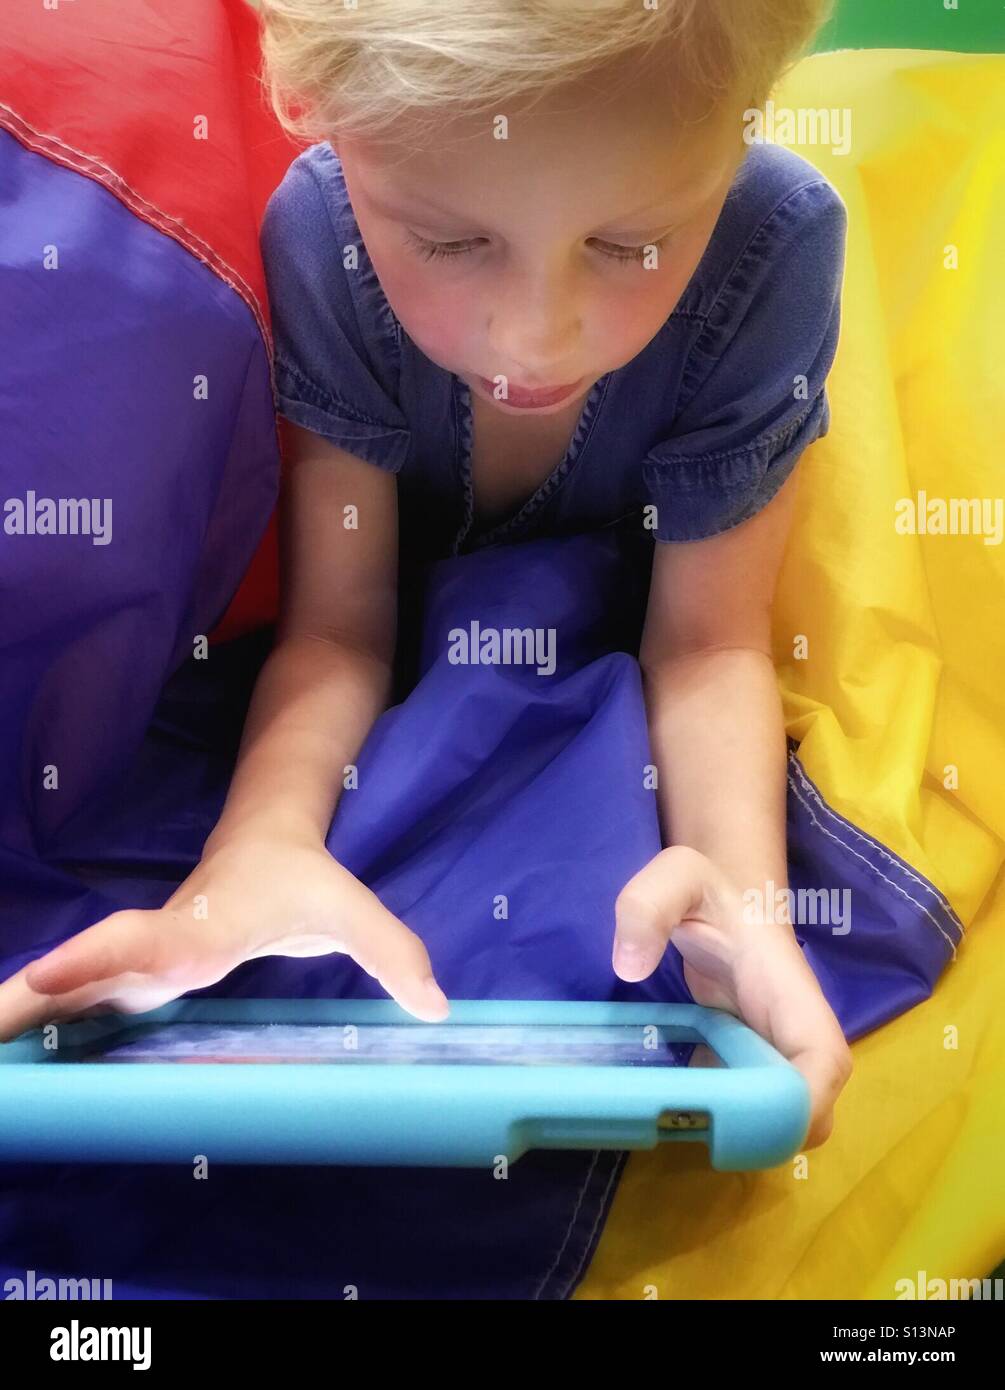 A child laying on her stomach on a deflating ball plays a game on her tablet. Stock Photo